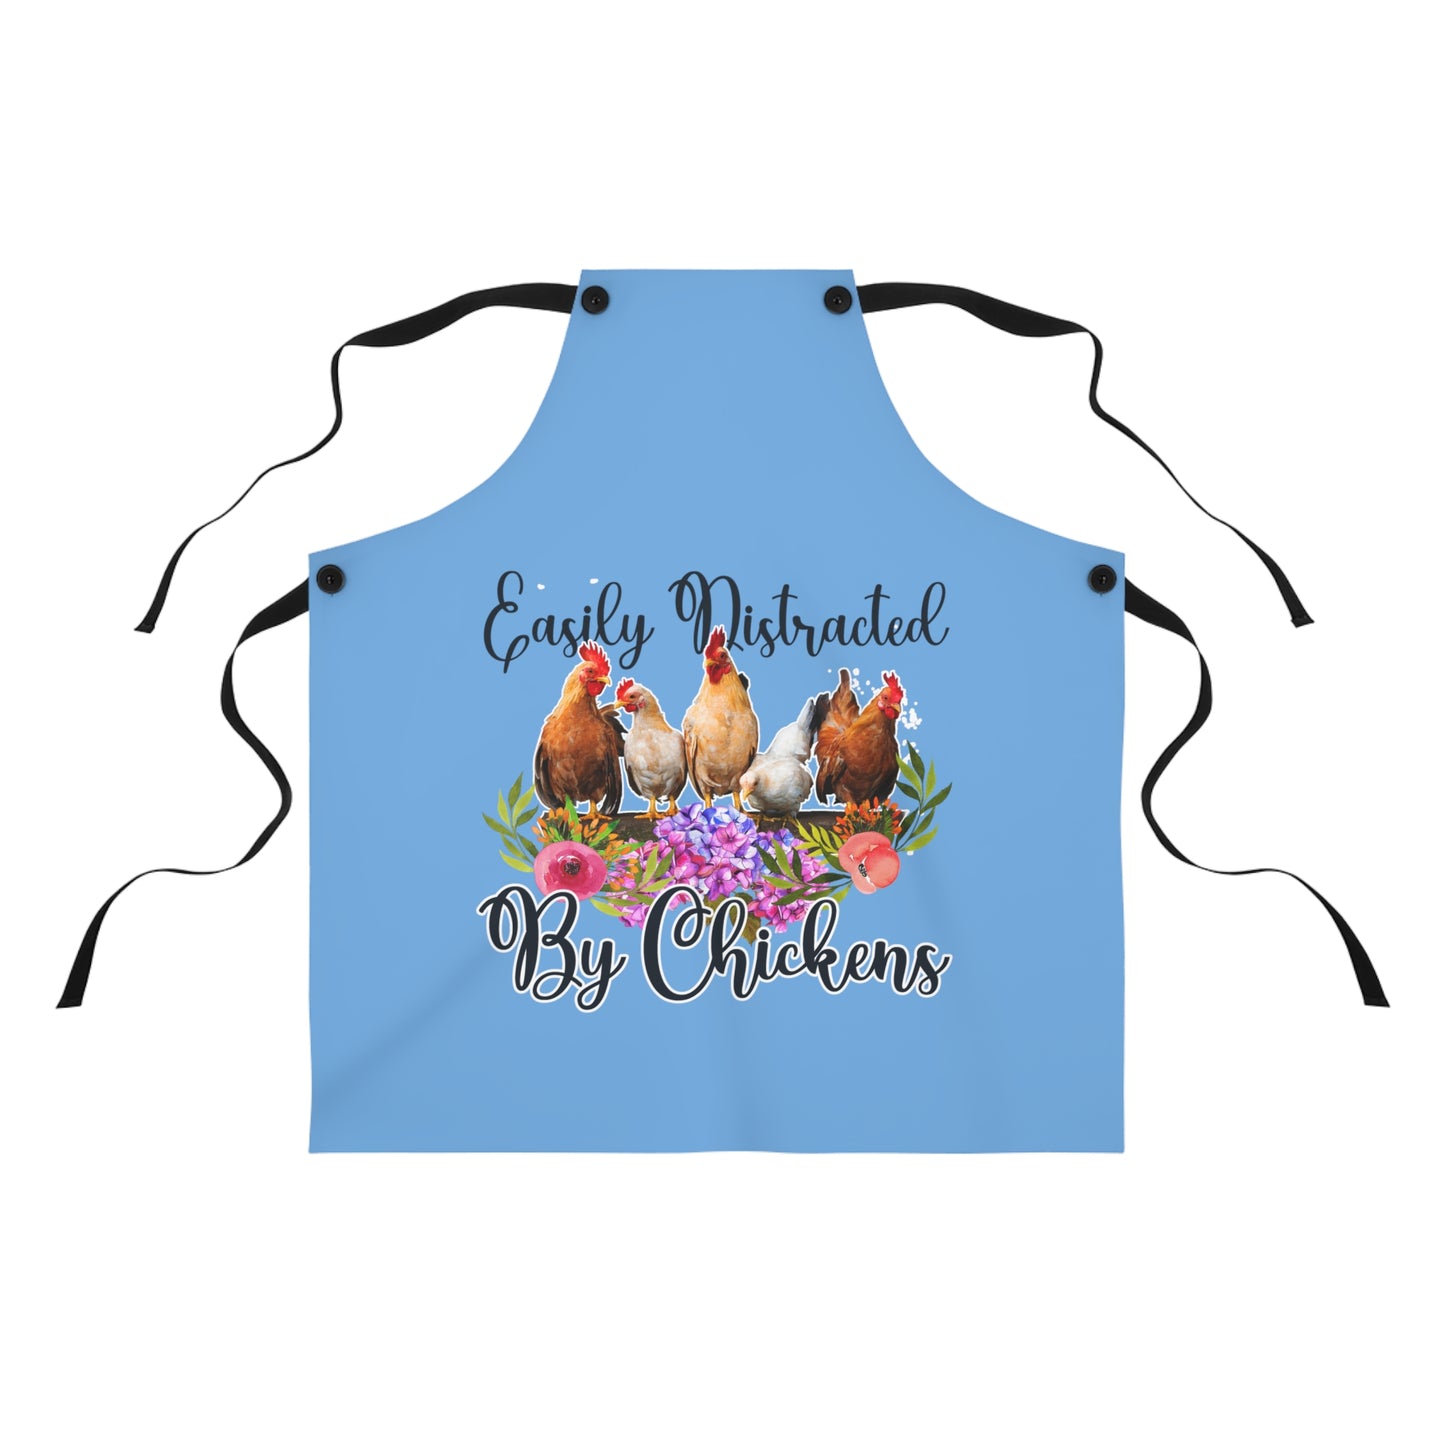 Easily Distracted by Chickens Apron